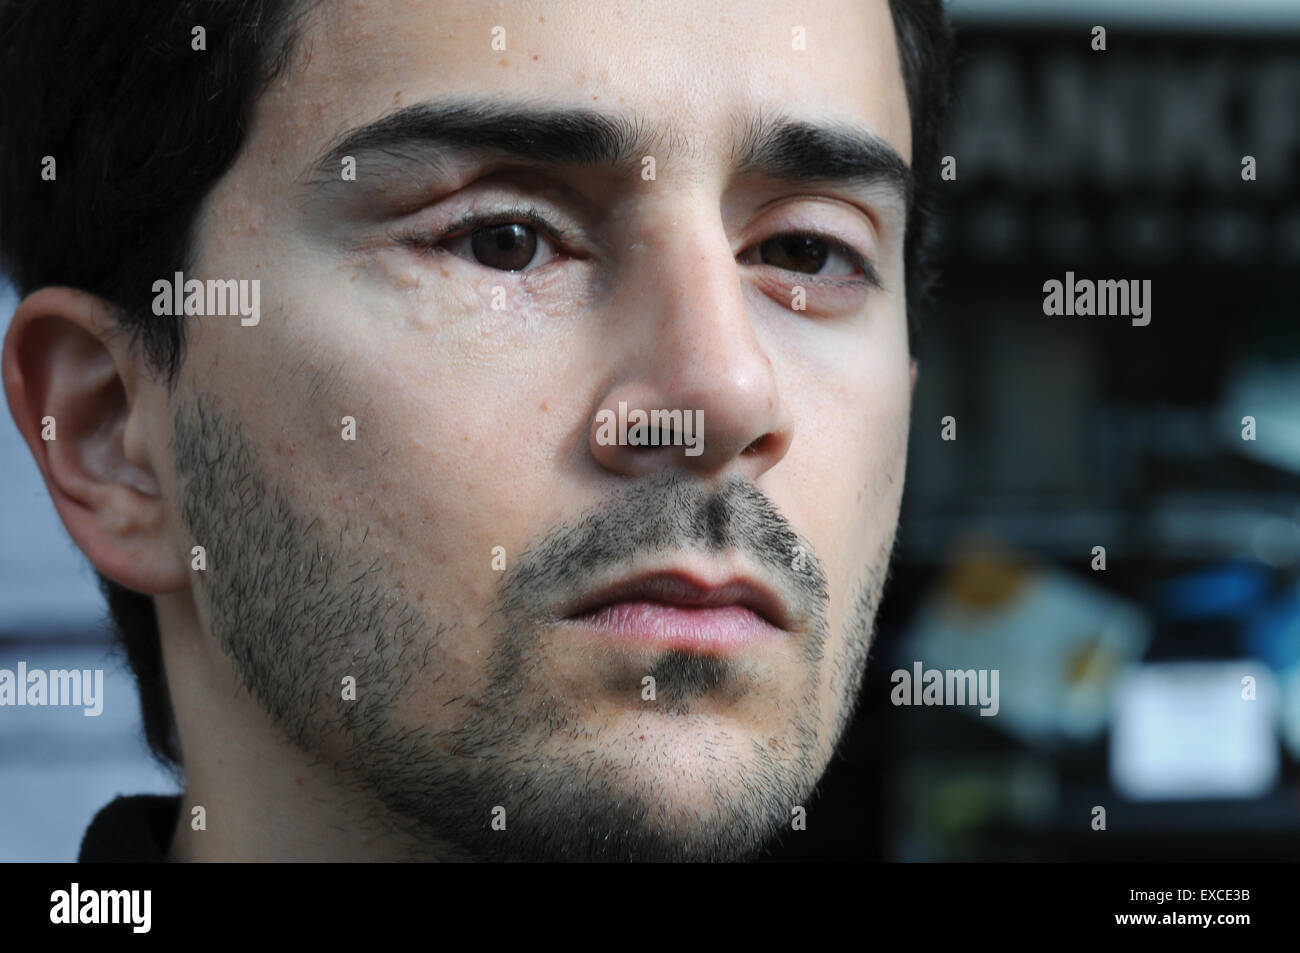 Nicola Tanno, Italian, one of those affected by the use of rubber bullets at the place where he was shot, the Frankfurt Mas located next to Plaza Spain in Barcelona. Spain. He lost an eye. Police violence. Dangerous weapons. Stock Photo